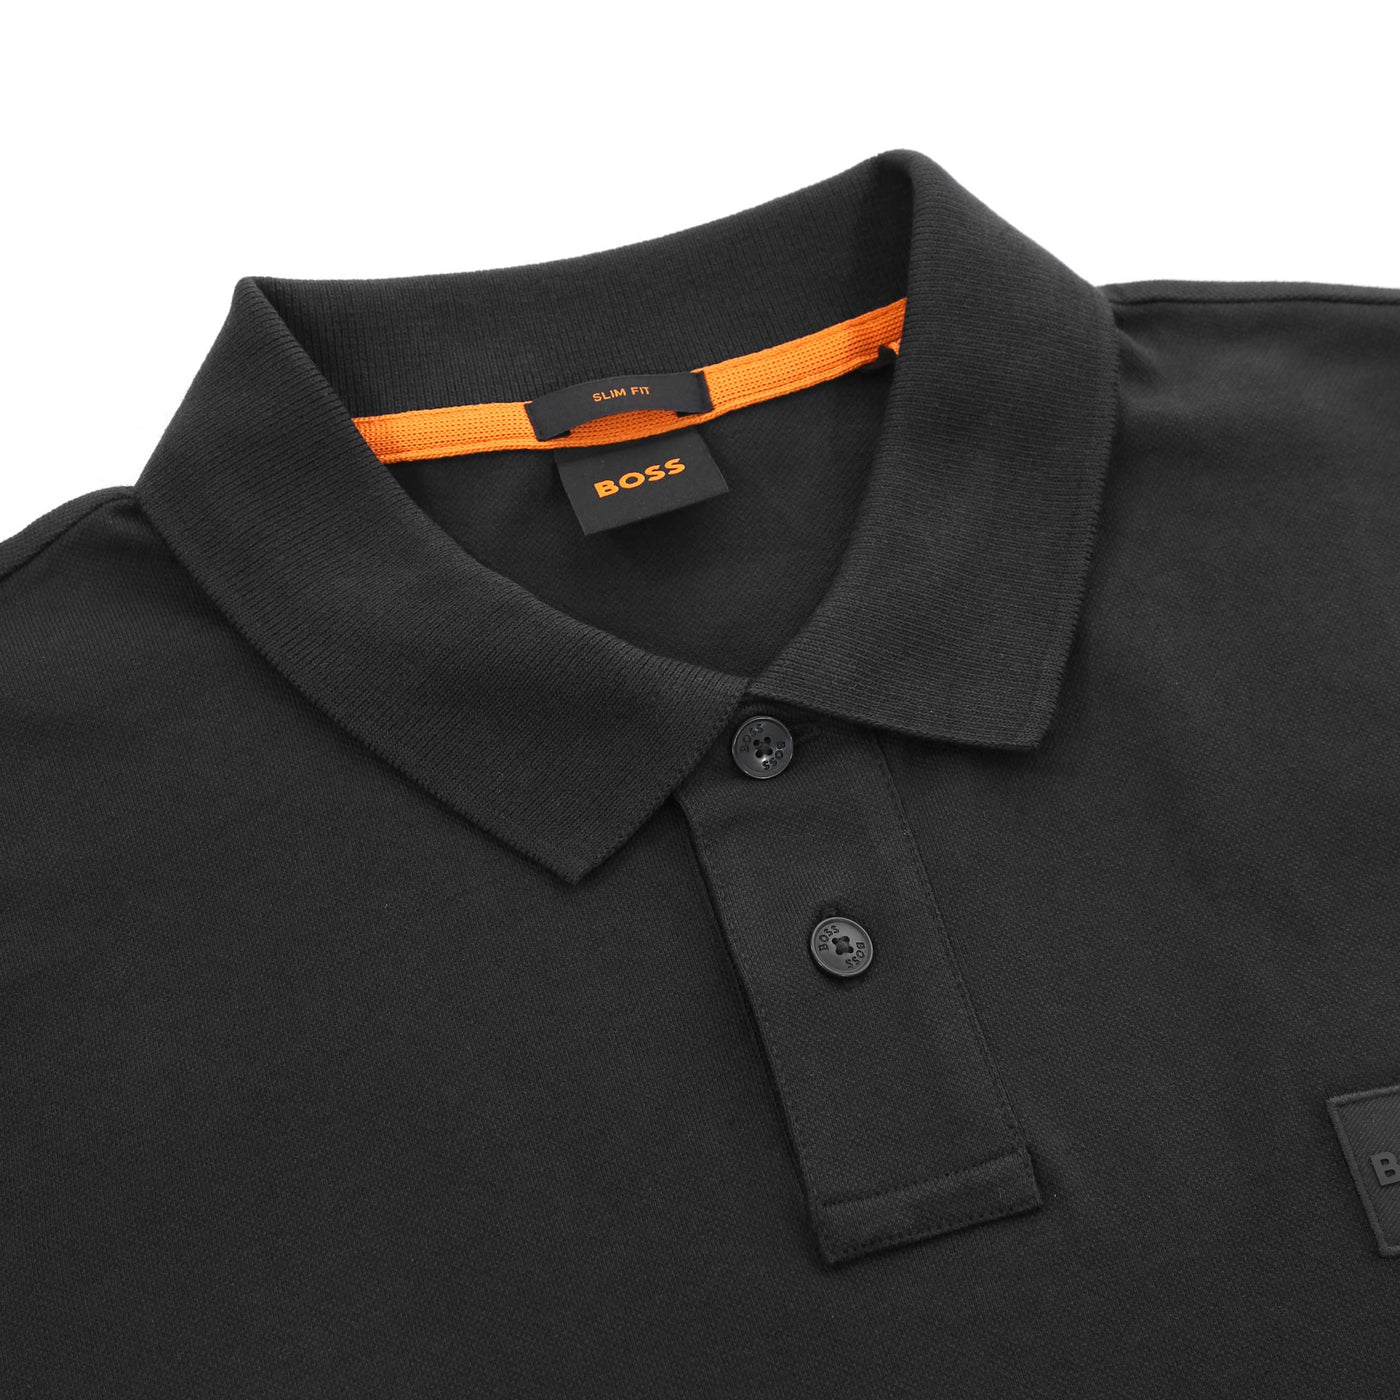 BOSS Passerby Long Sleeve Polo Shirt in Black